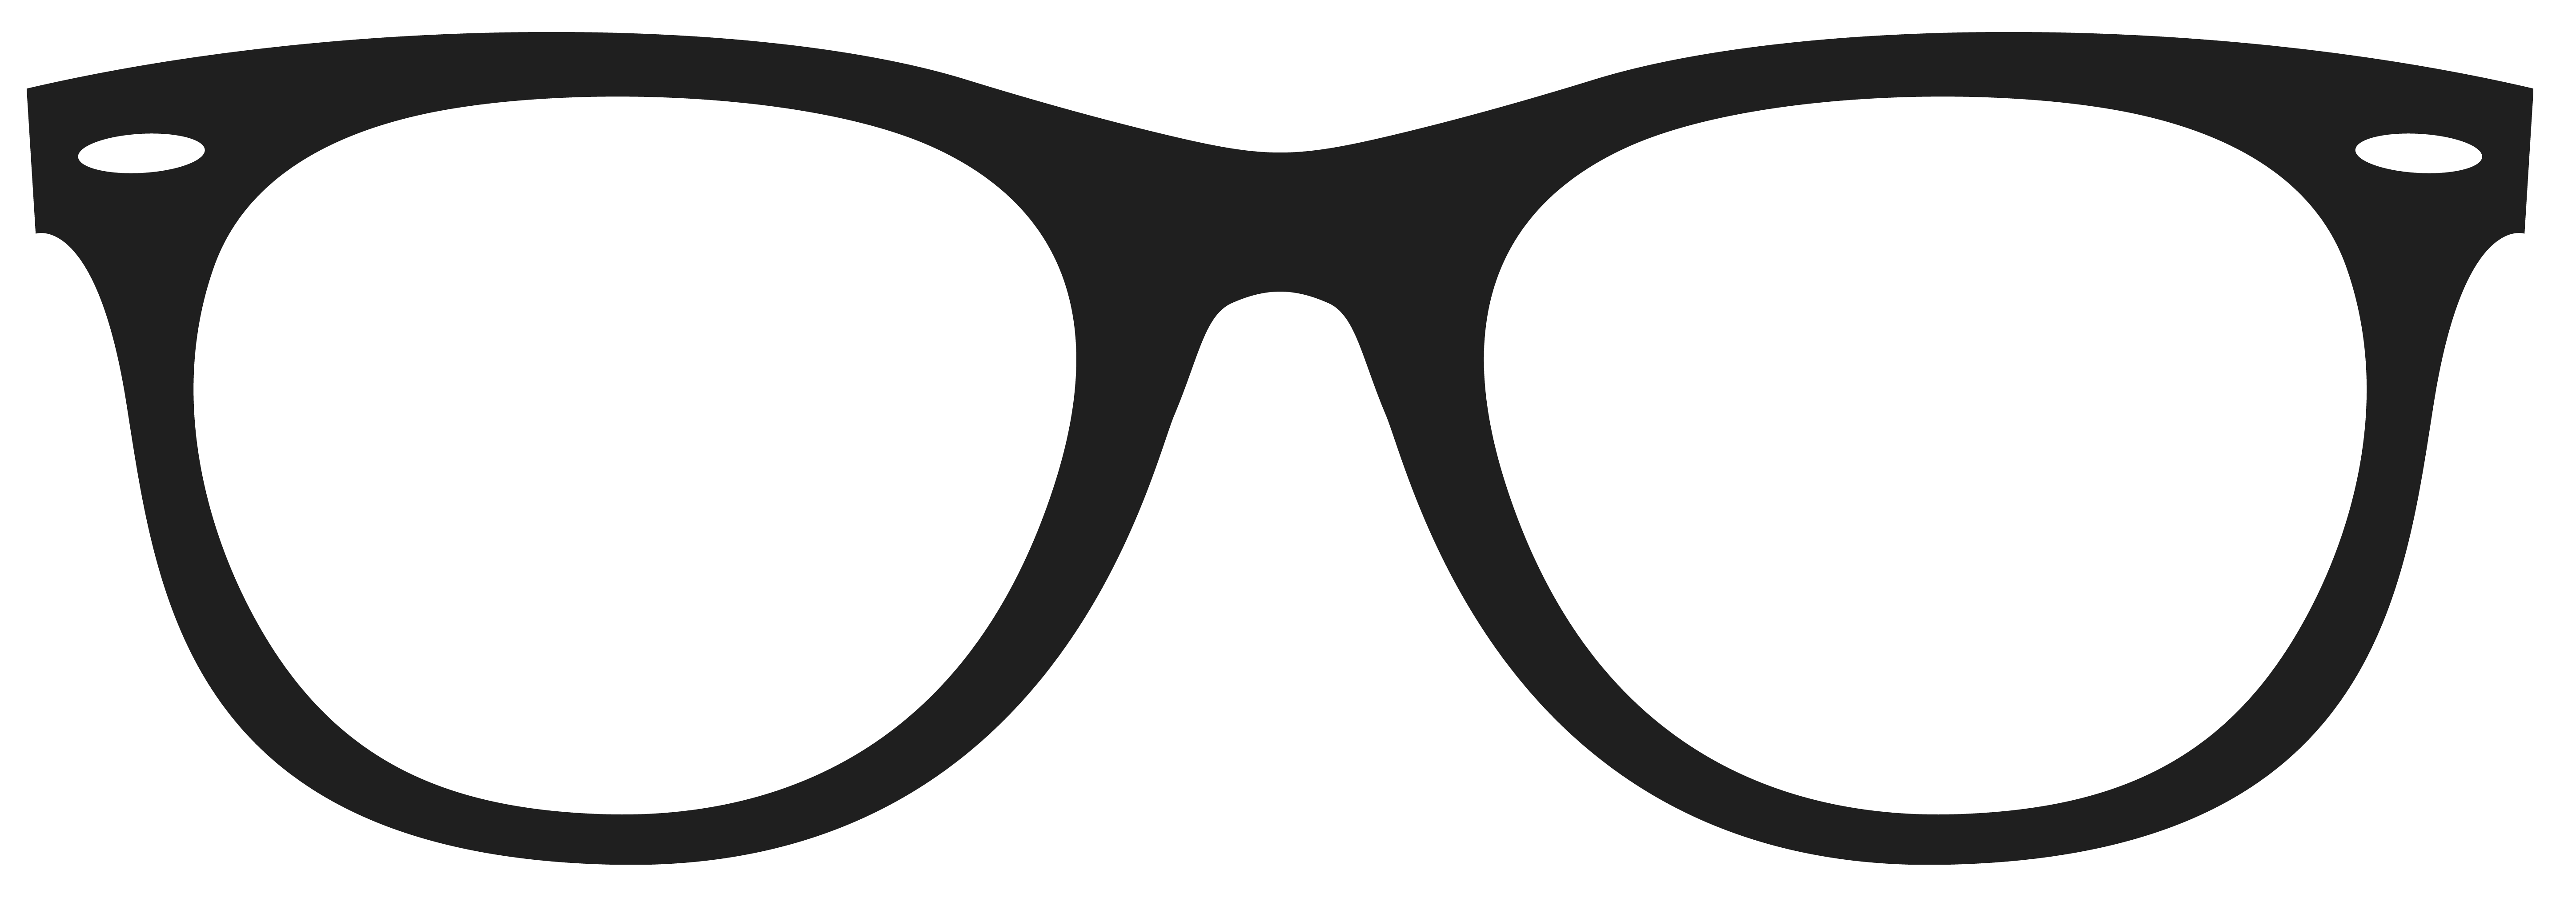 Movember Glasses PNG Clipart Image